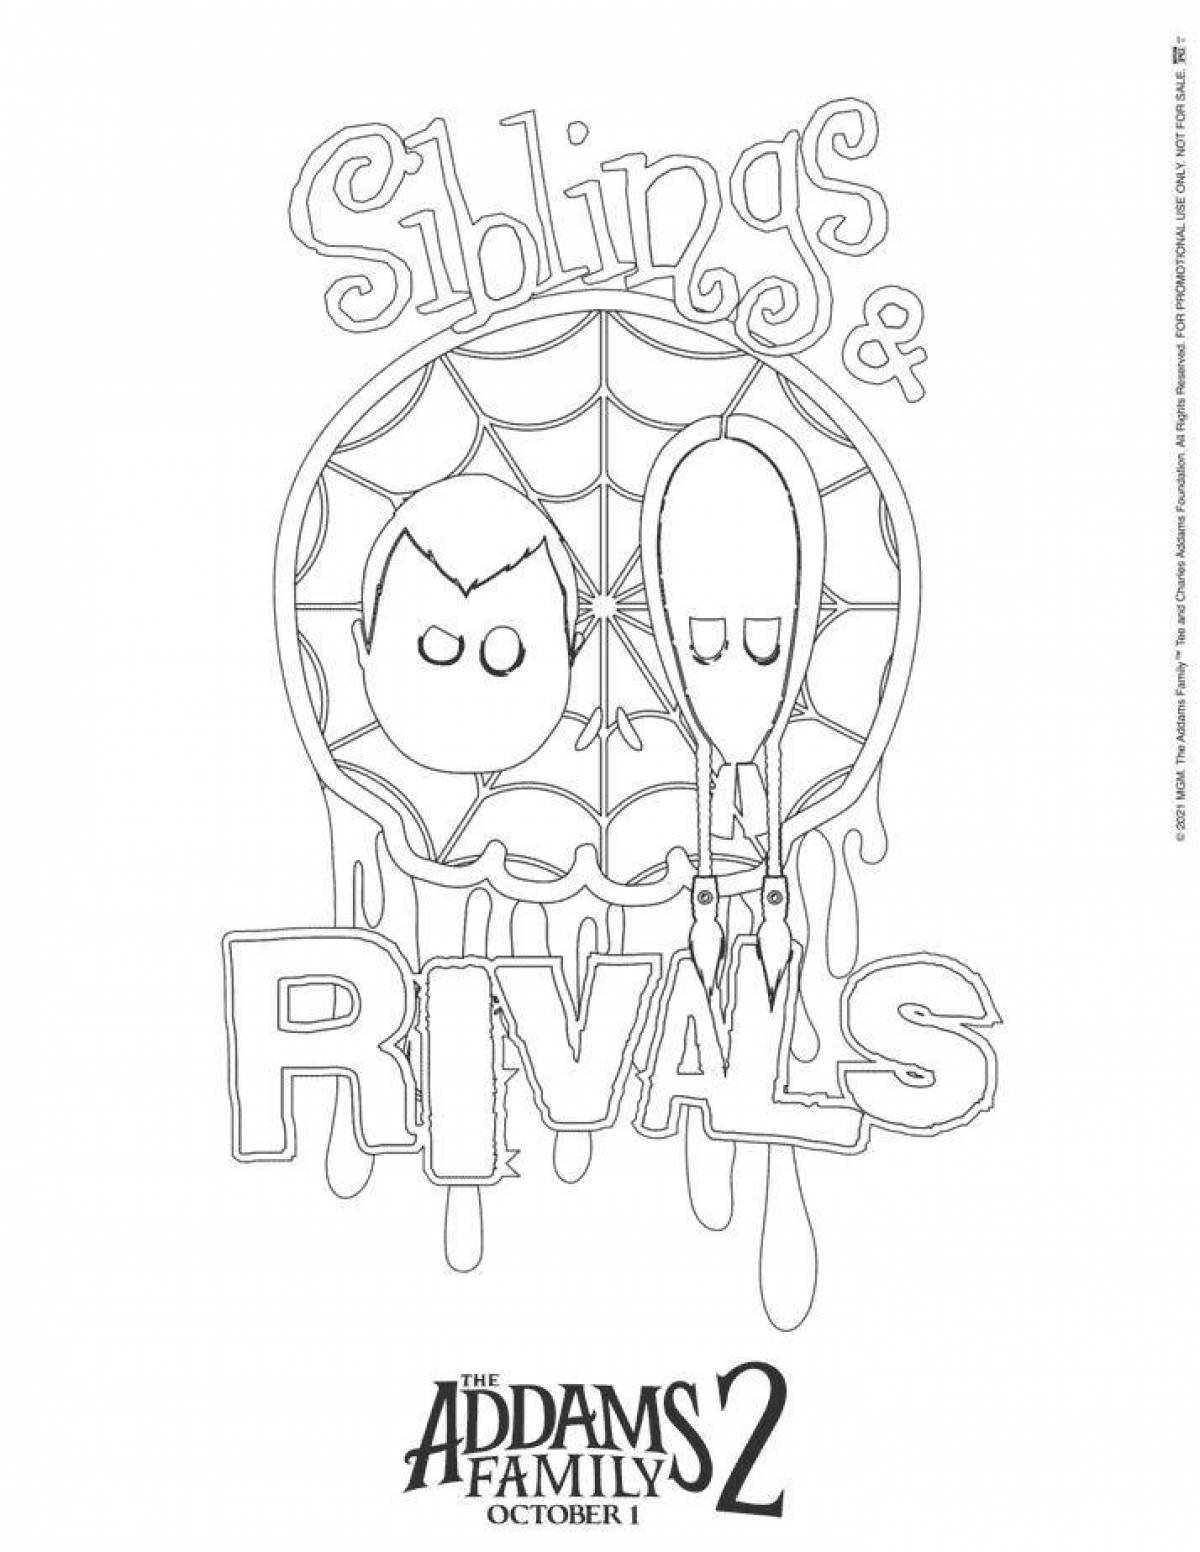 Enit wednesday cute coloring page